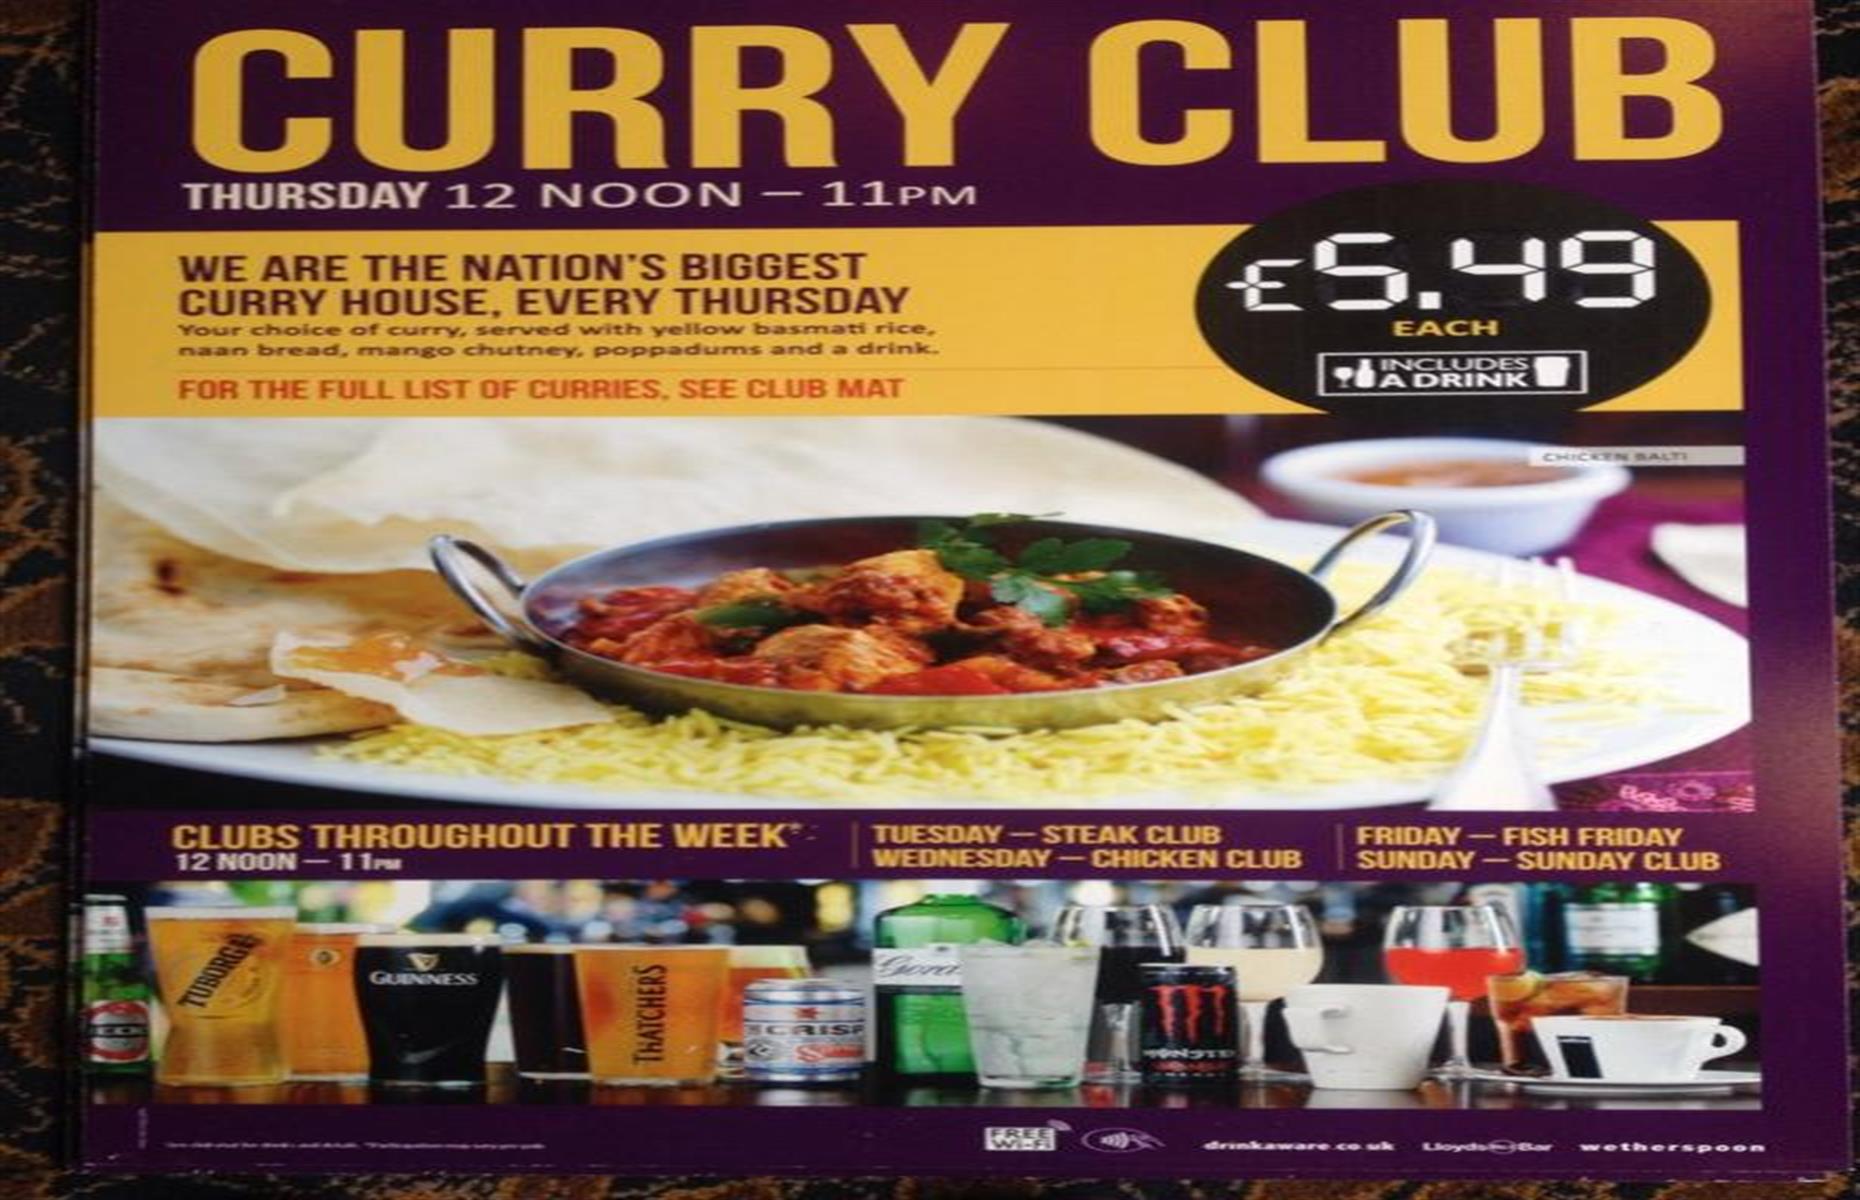 Curry Club comes to town